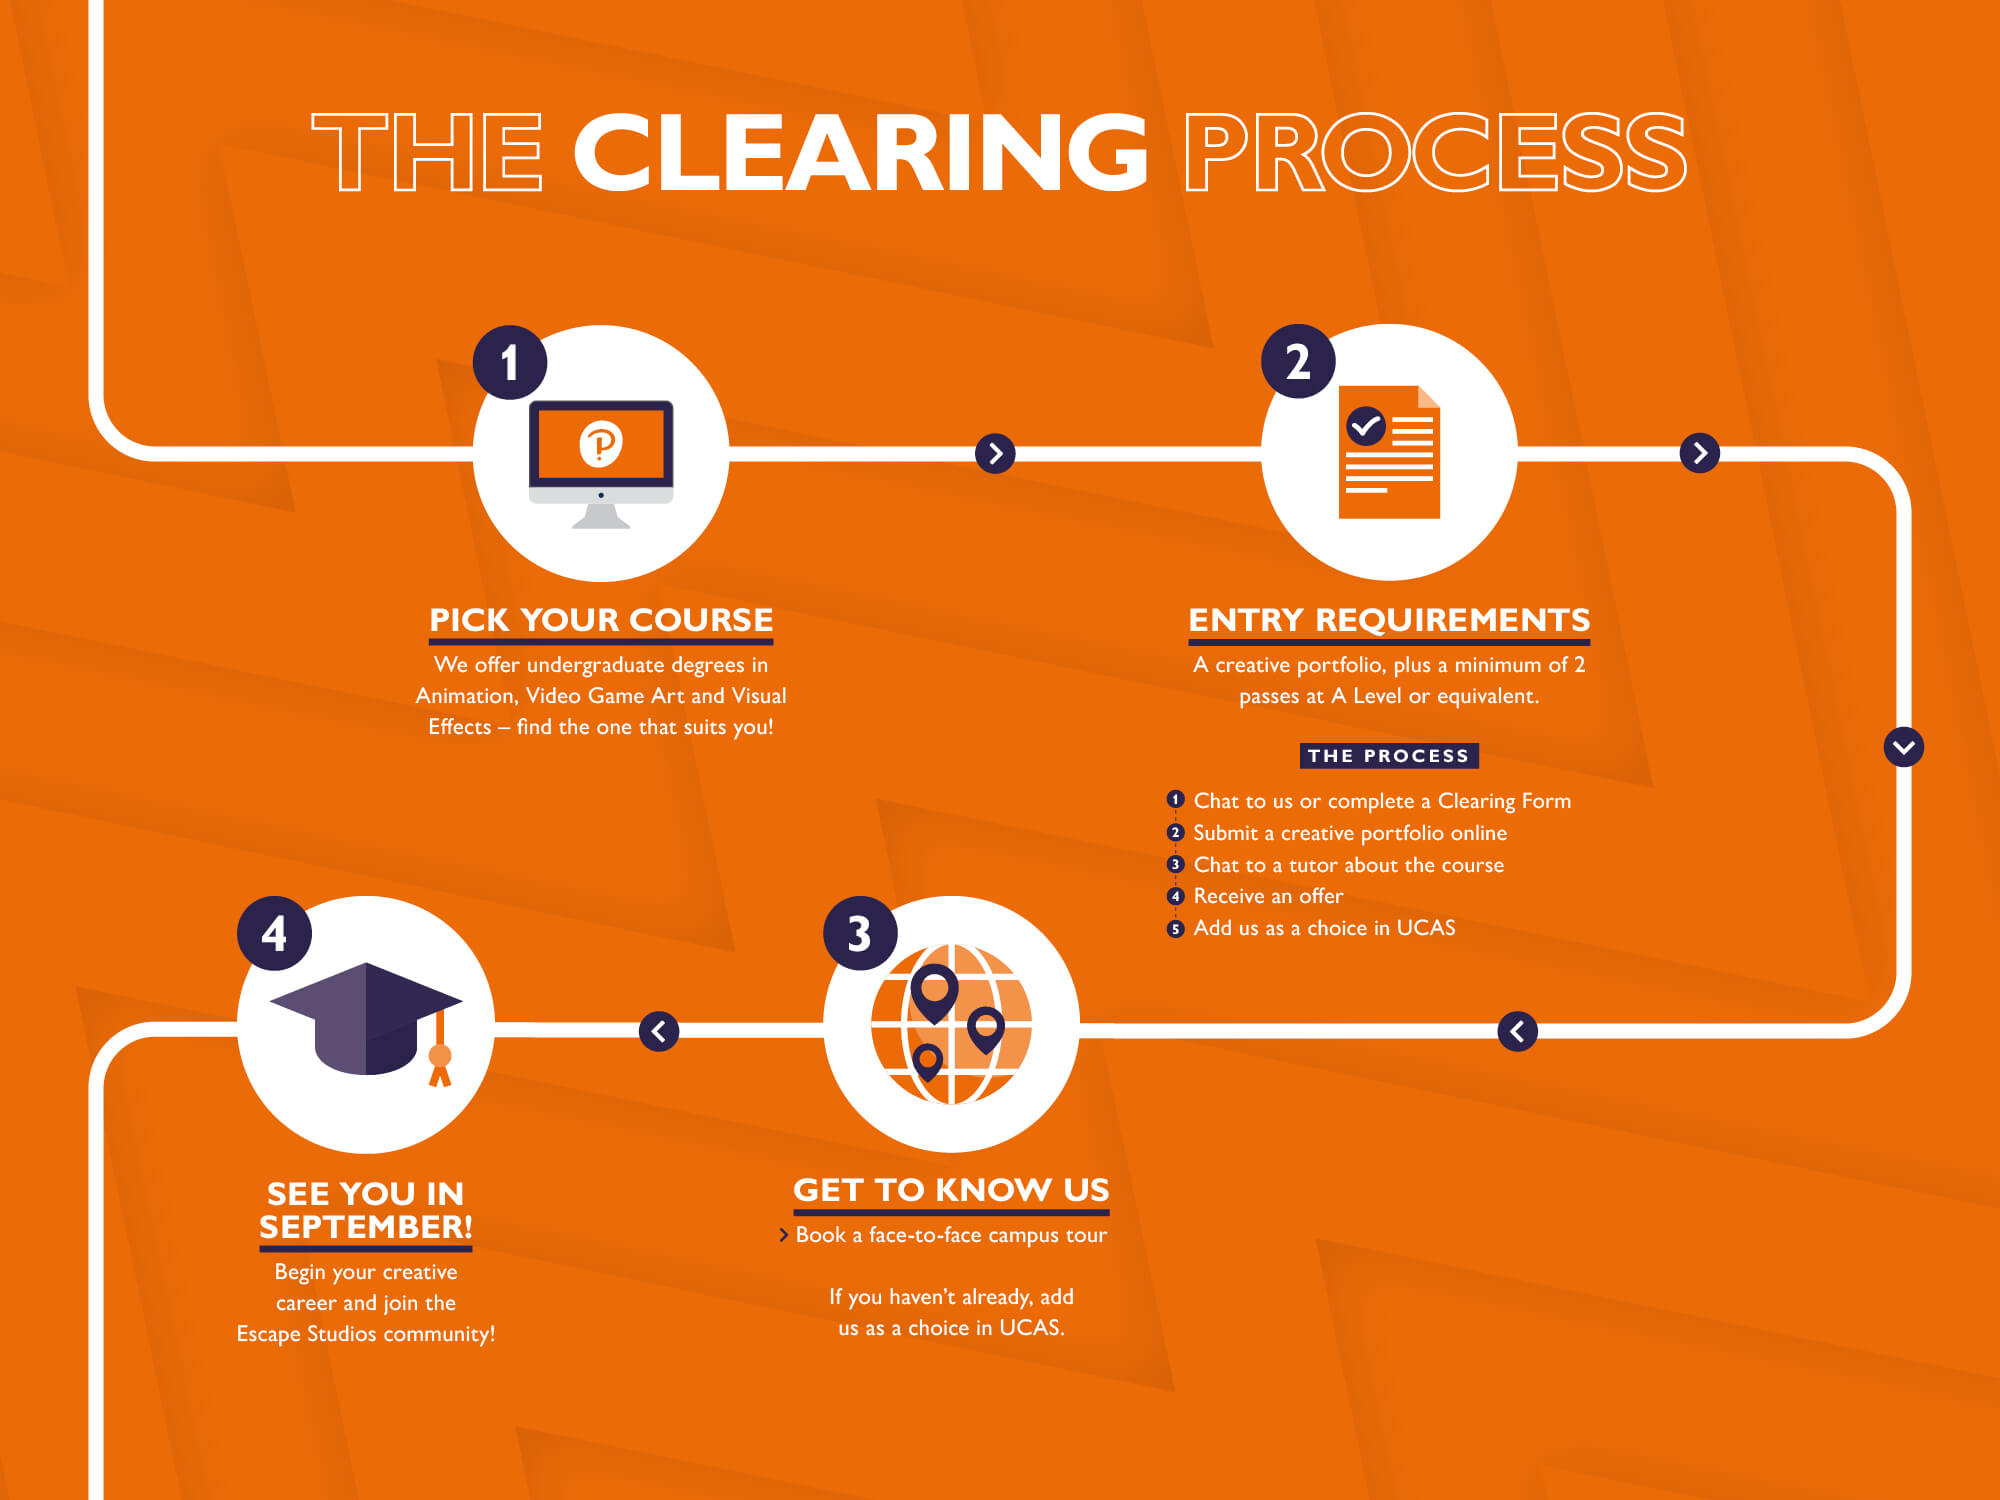 Clearing process infographic